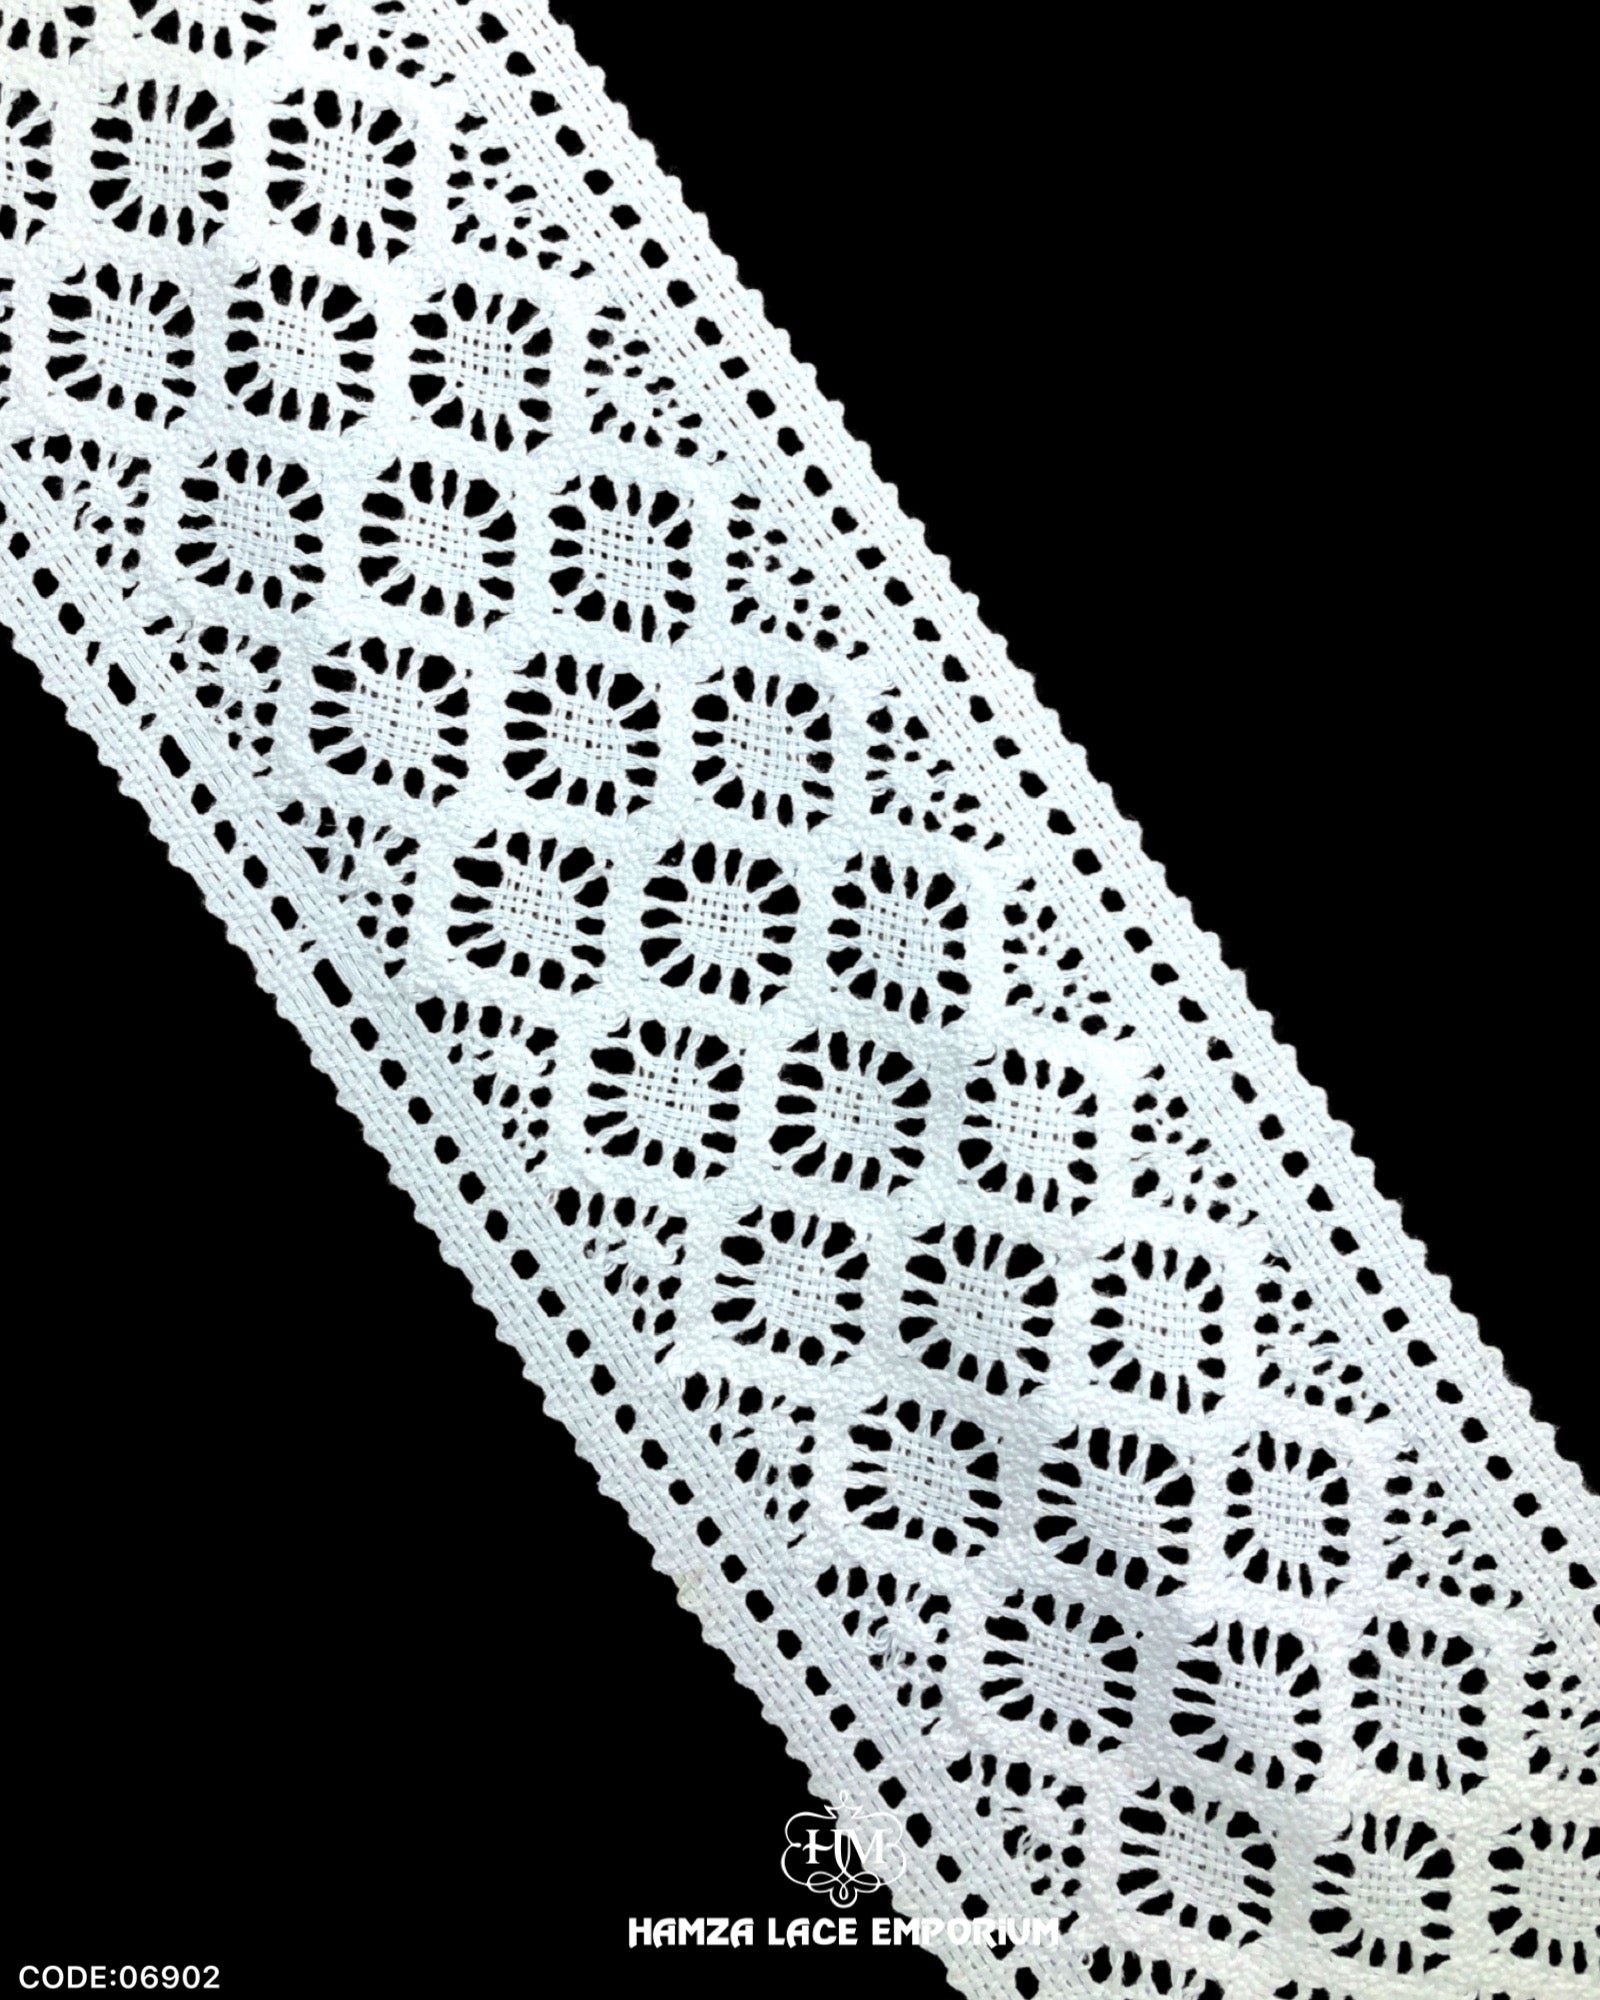 'Center Filling Crochet Lace 06902' with the brand name 'Hamza Lace' written at the bottom